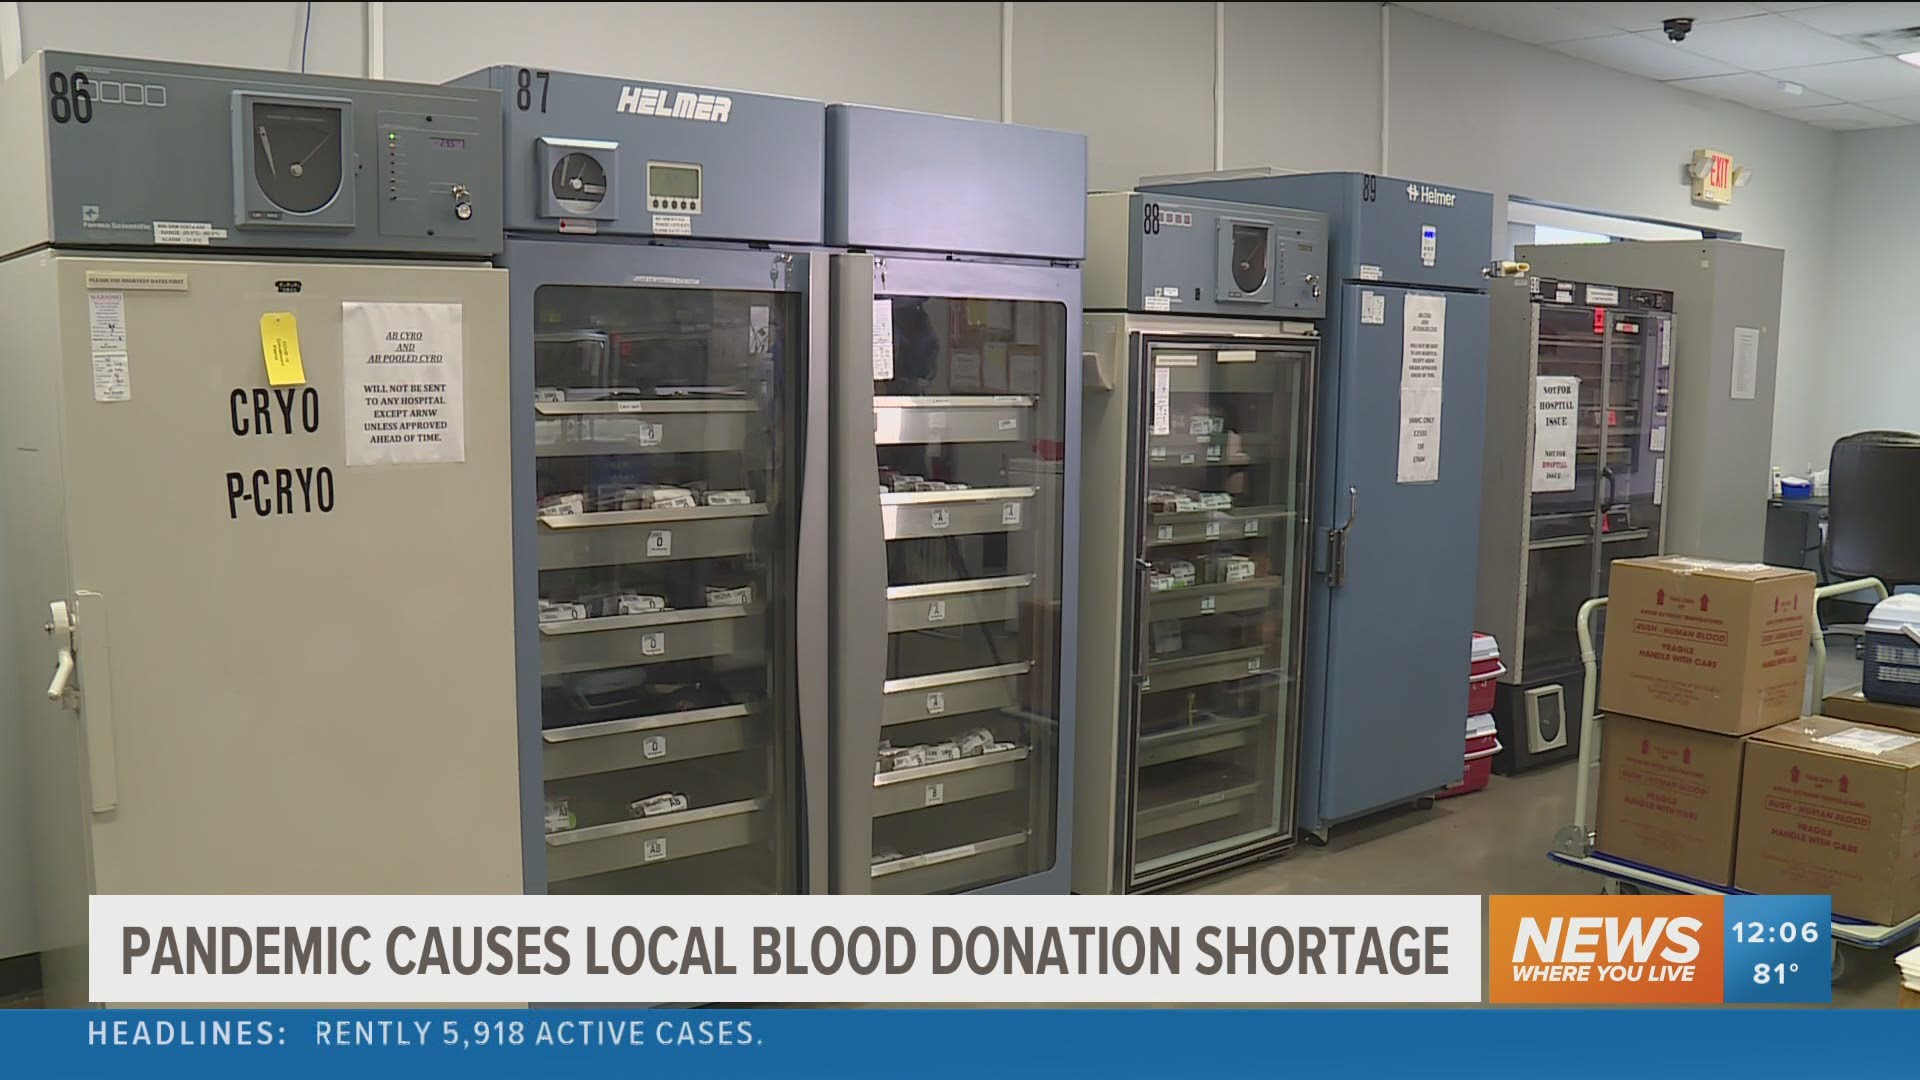 There will be an emergency blood drive in Fayetteville Tuesday. The blood reserve is dwindling because of blood drive cancellations due to the pandemic.